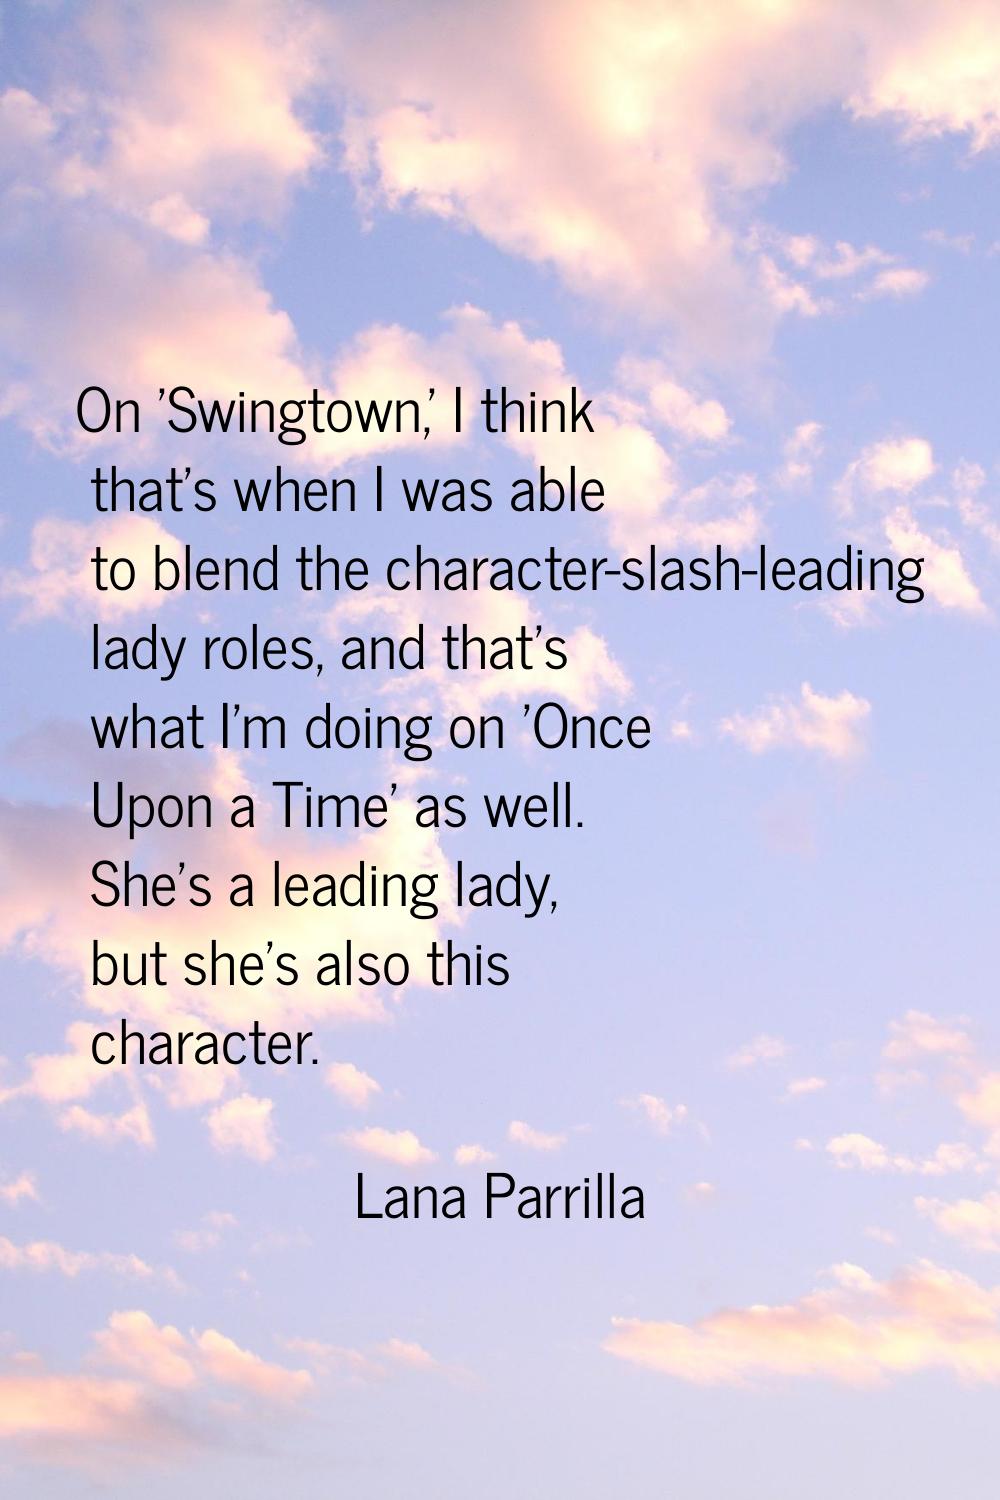 On 'Swingtown,' I think that's when I was able to blend the character-slash-leading lady roles, and